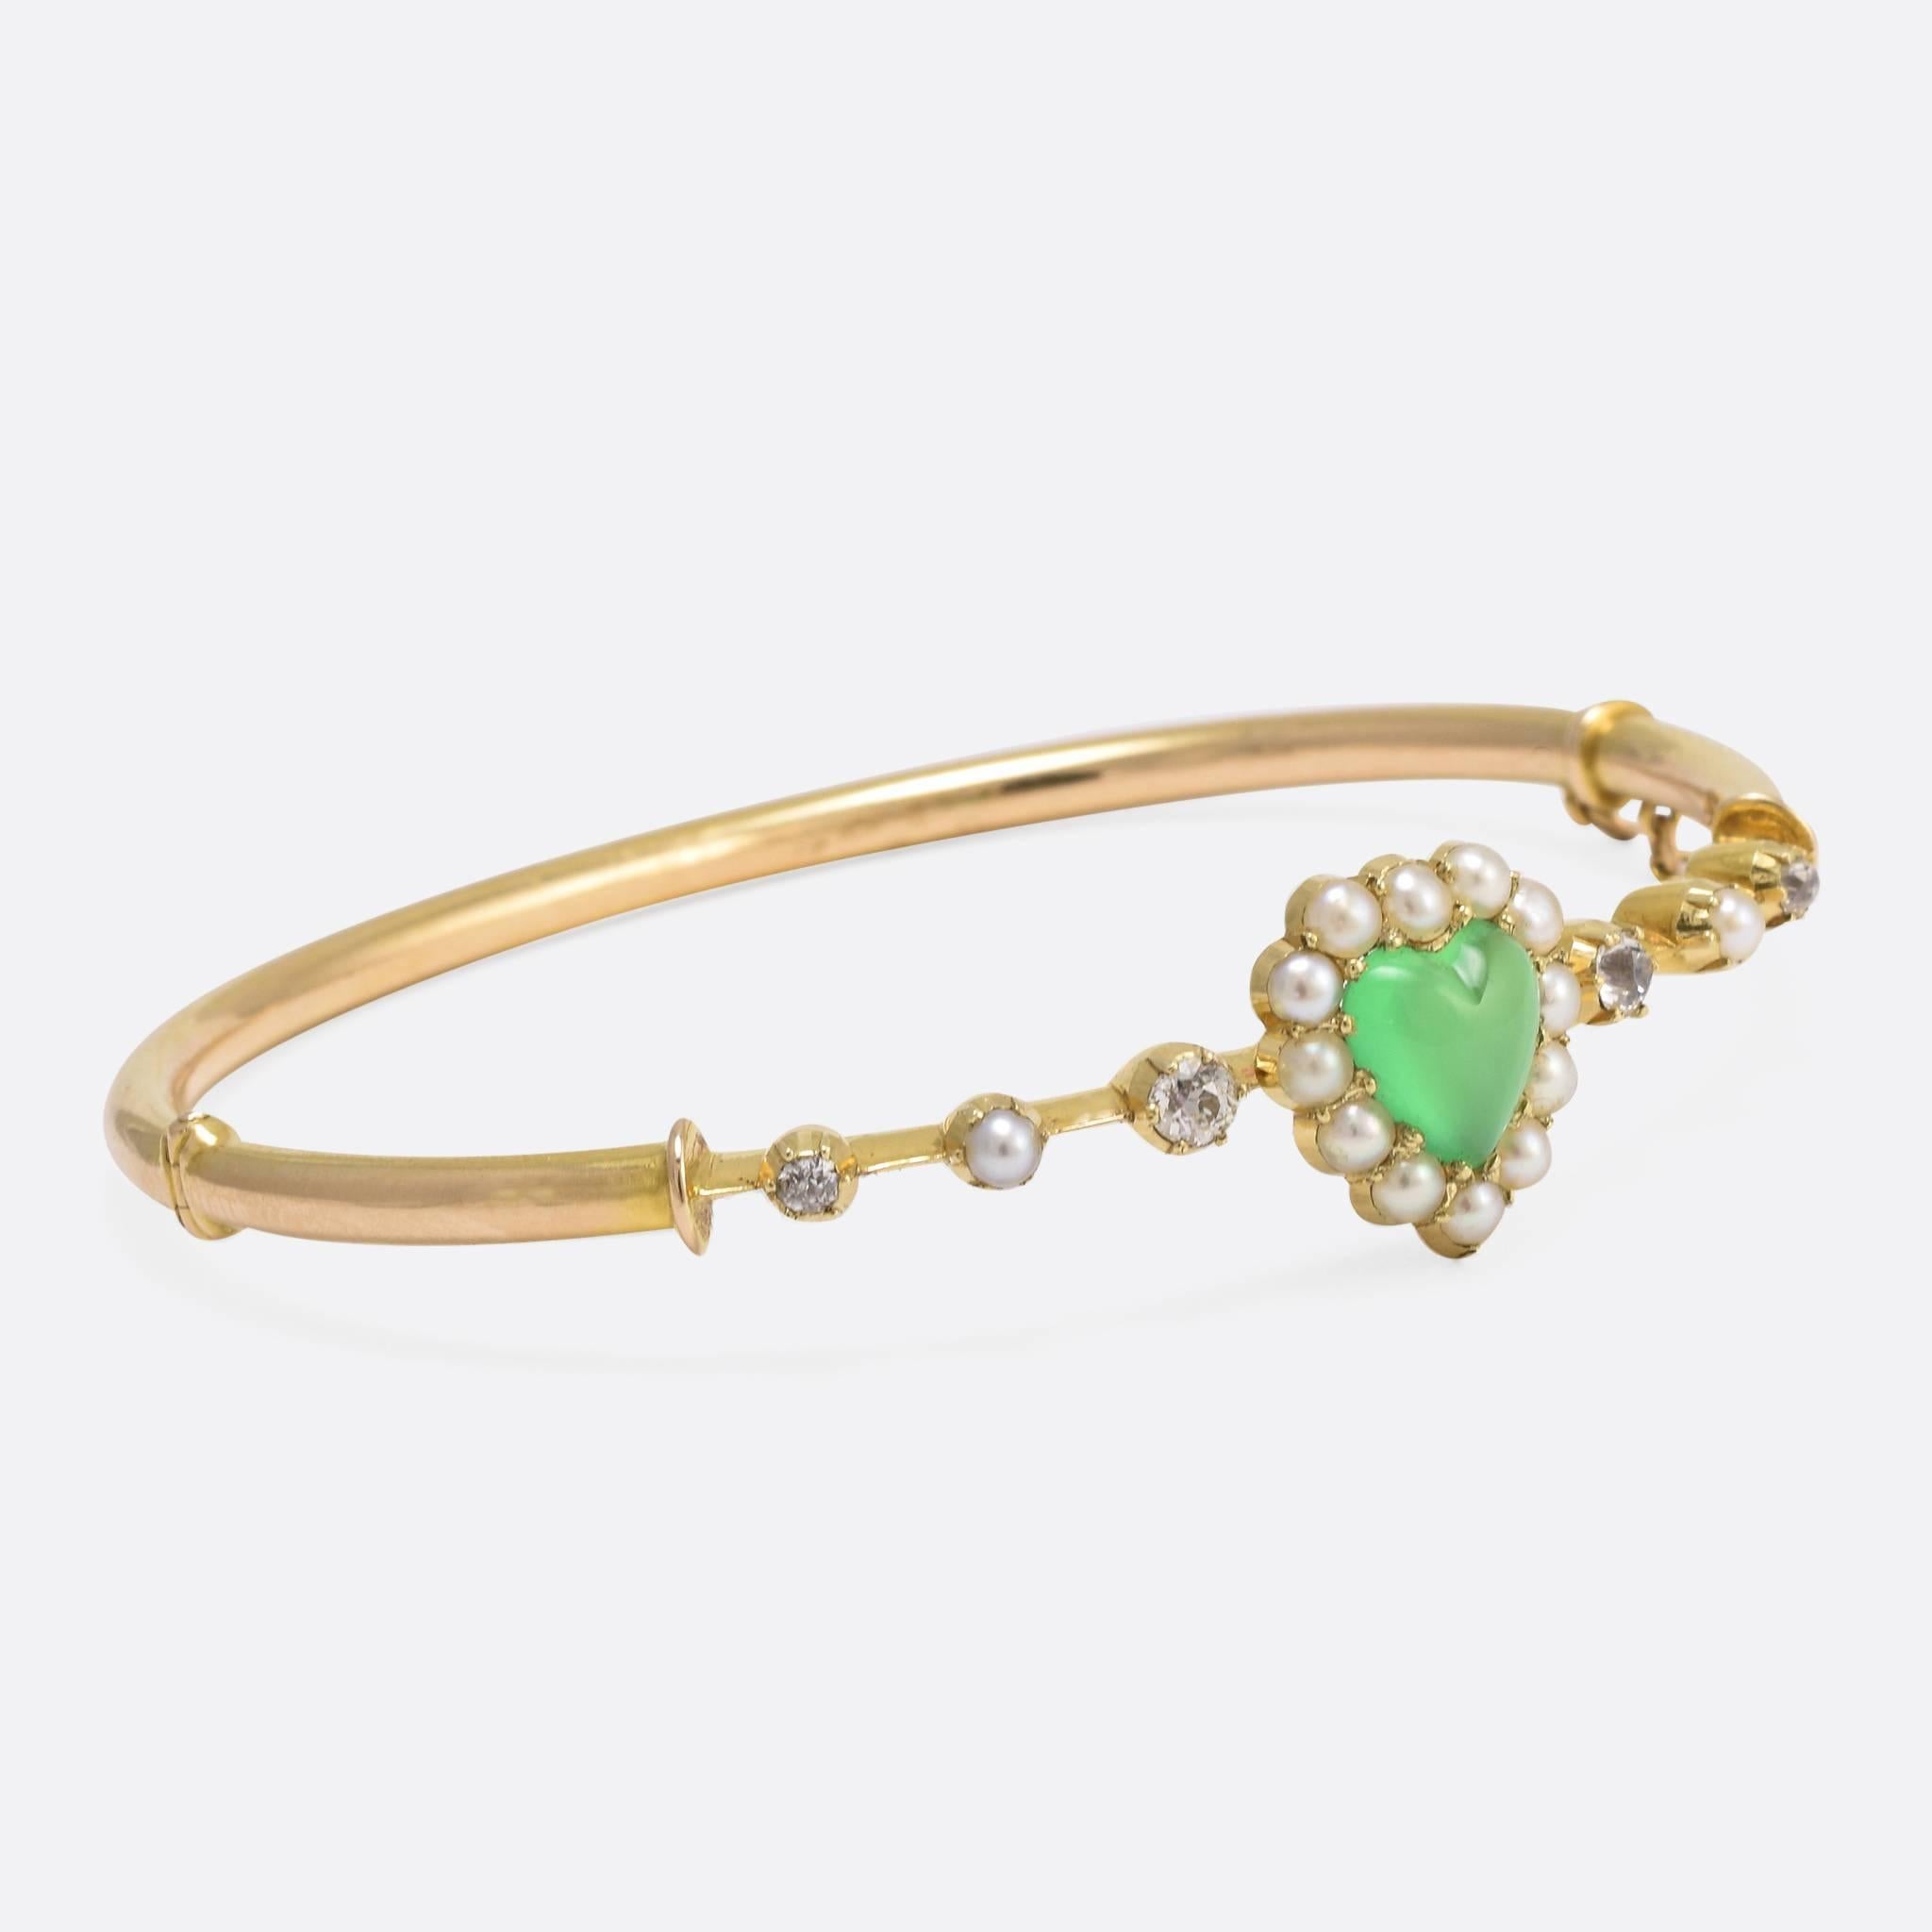 This attractive Victorian bangle features a heart-shaped head, set with a gorgeous apple-green chrysoprase cabochon surrounded by natural pearls. The shoulders are set with old mine cut diamonds, along with further pearls. Modelled in 15ct yellow